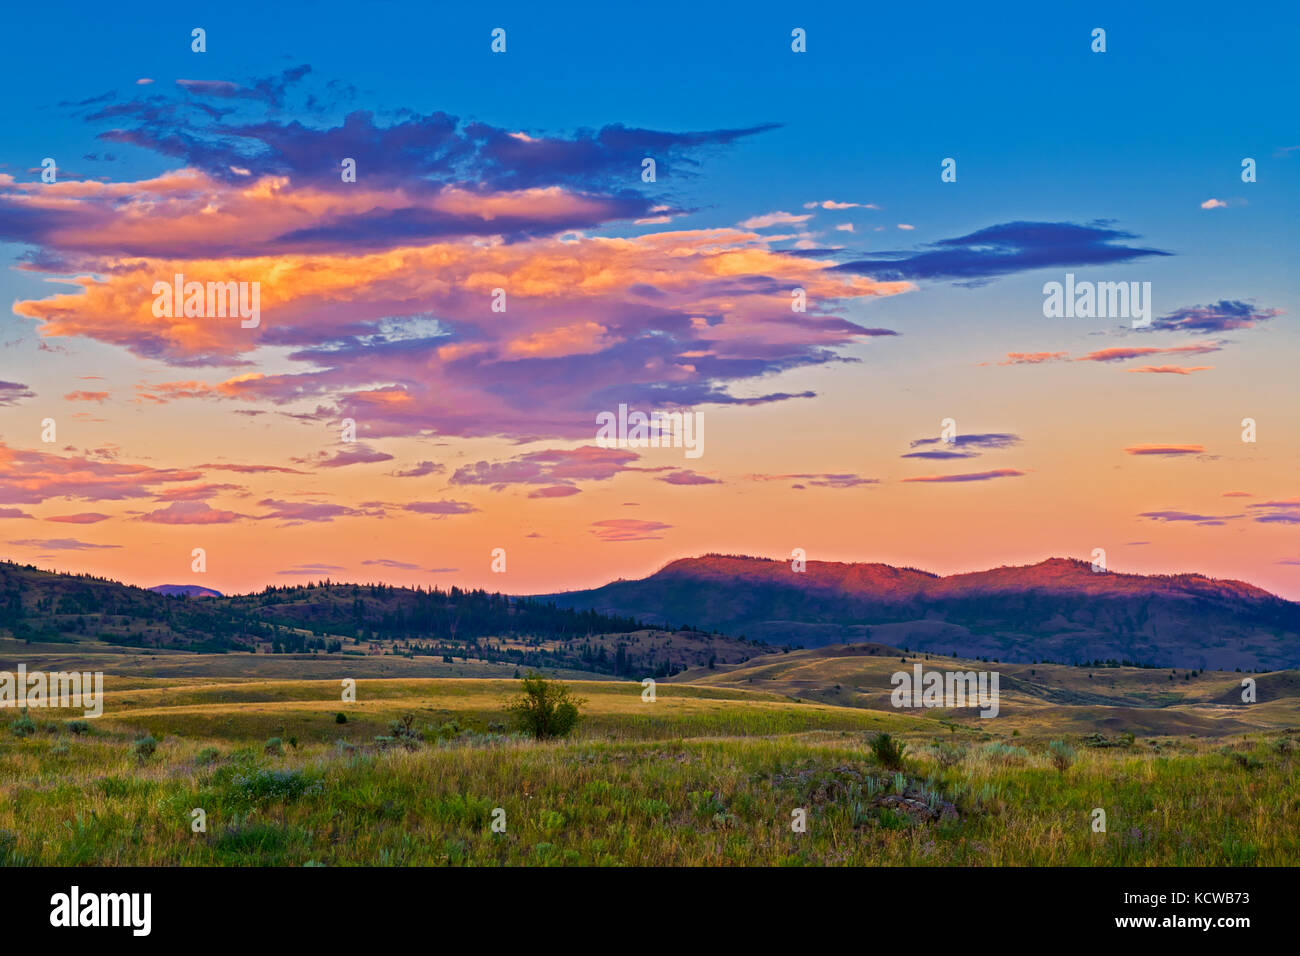 Tramonto sulle praterie, Thompson valley, Kamloops, British Columbia, Canada Foto Stock